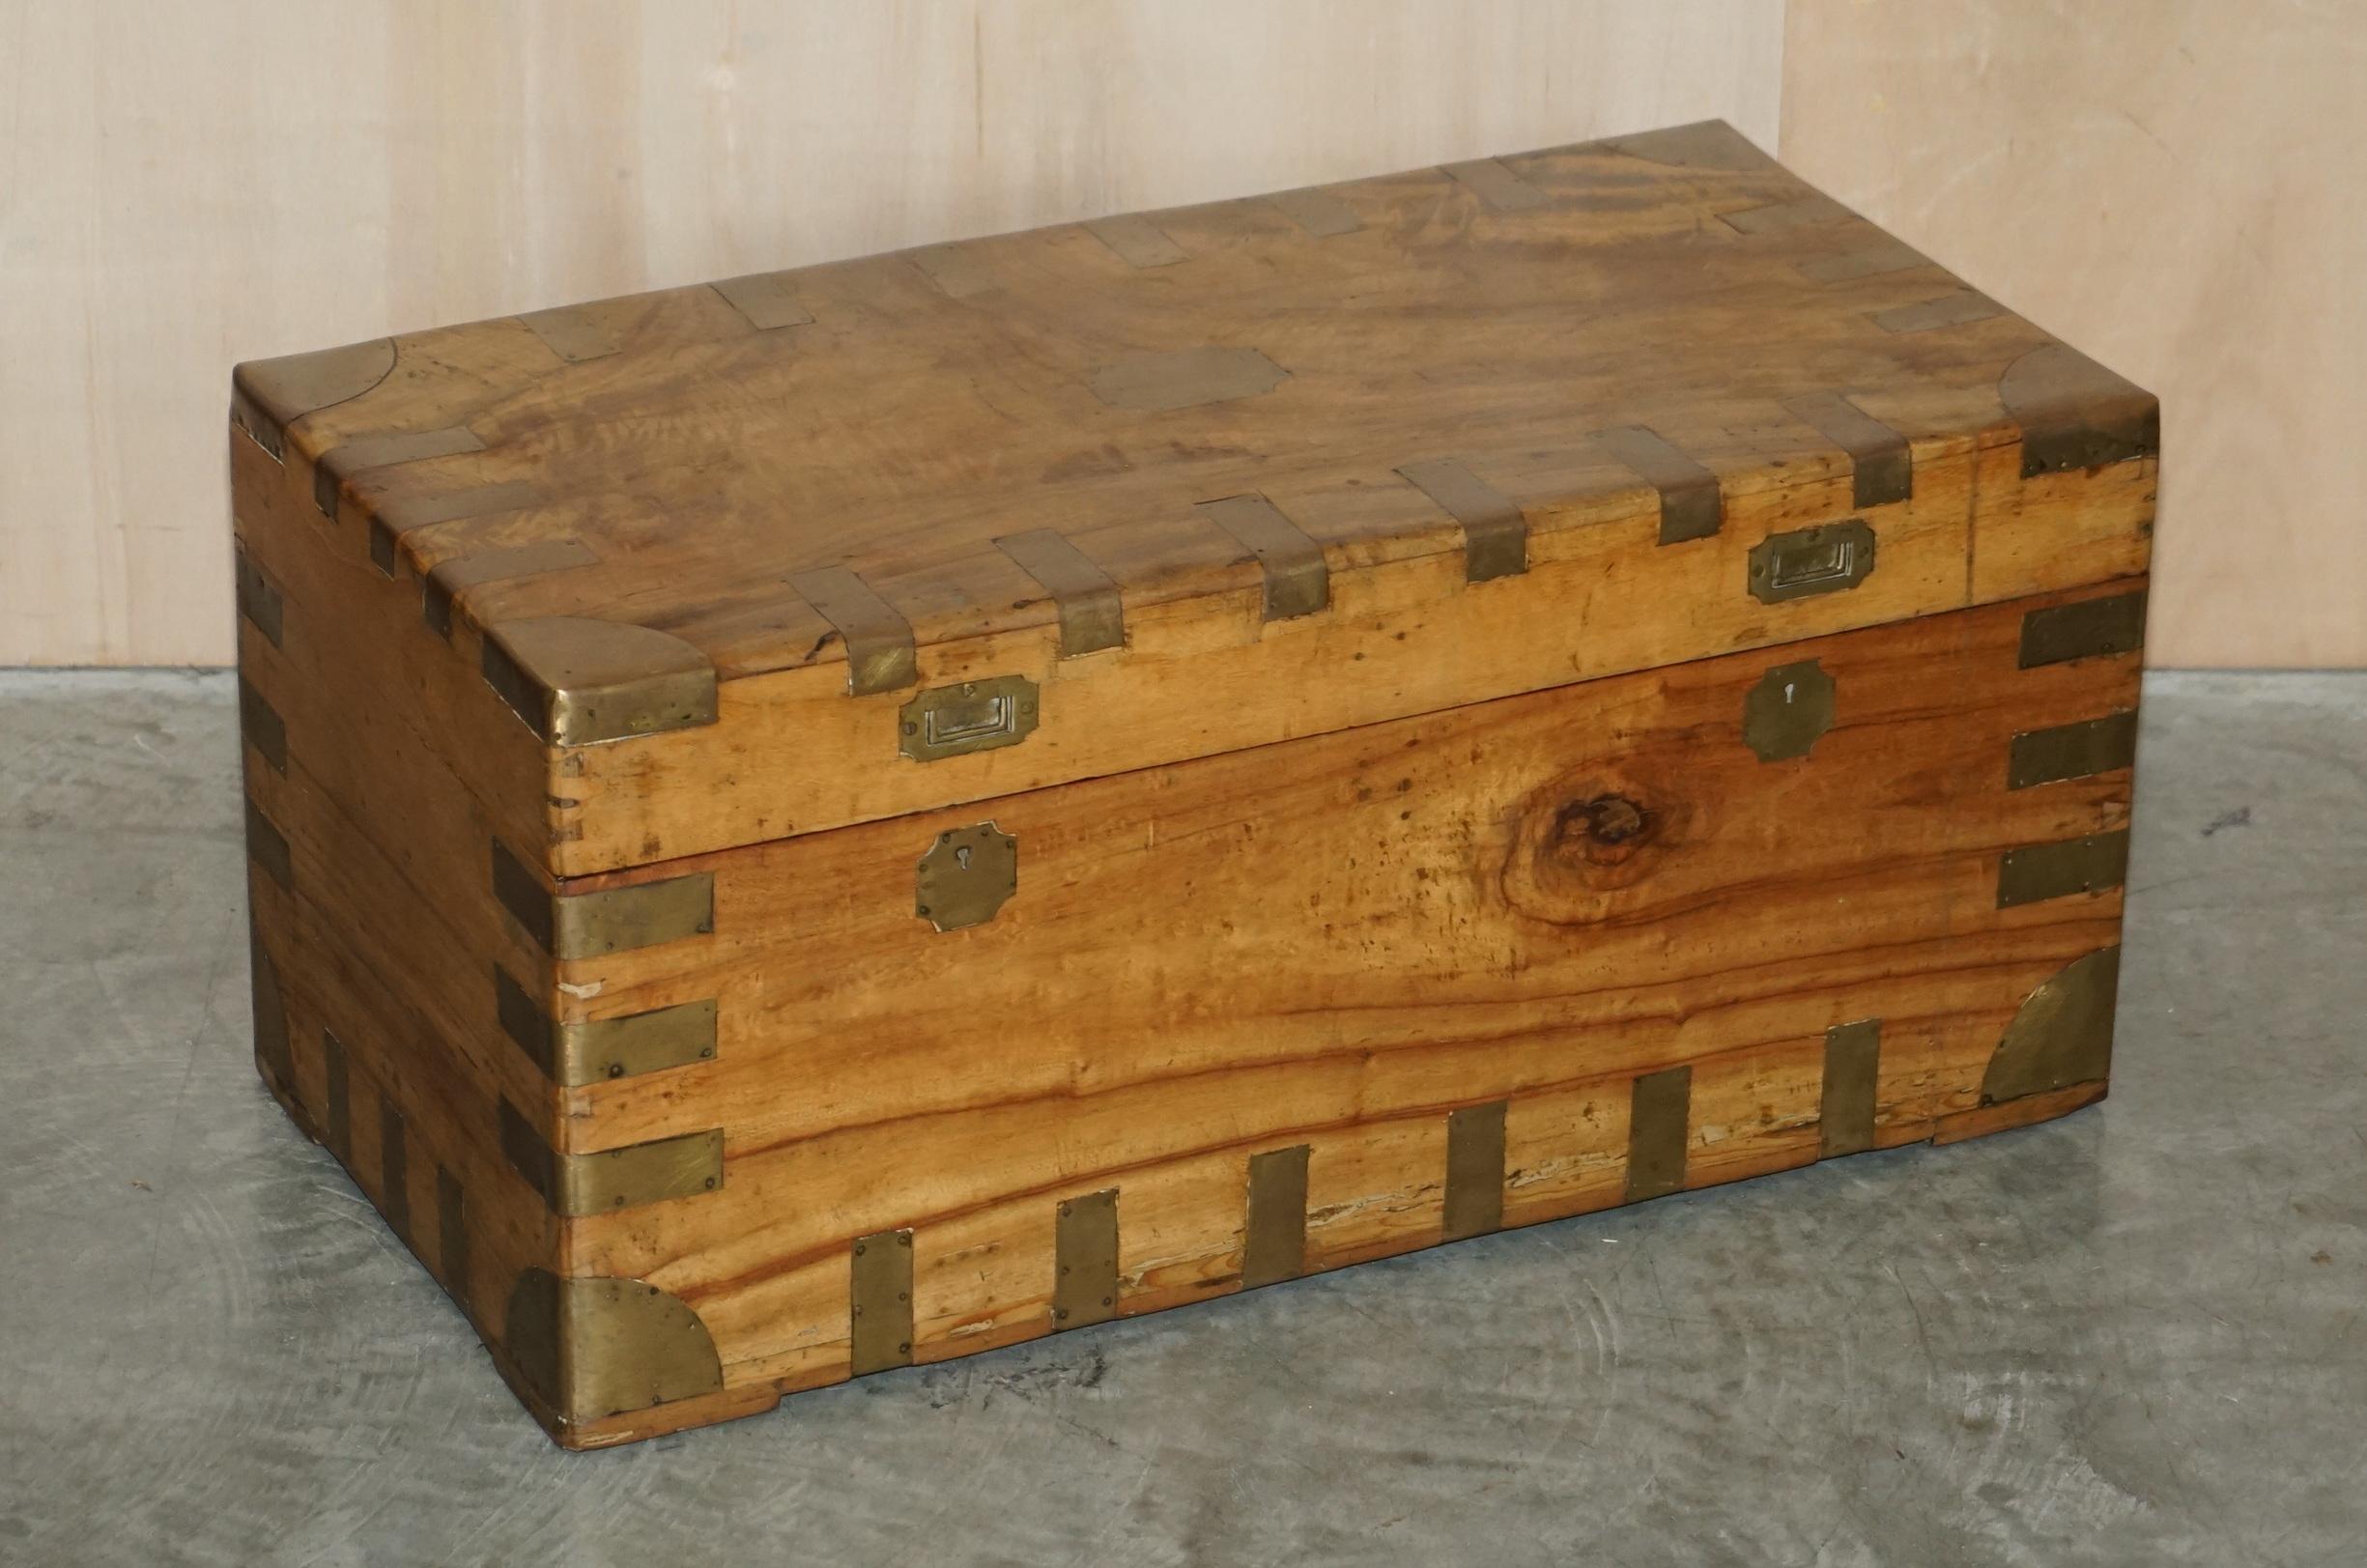 We are delighted to offer for sale this lovely circa 1880 antique Camphor wood with heavy brass inlay chest or trunk

A good looking and very decorative chest, ideally suited for storing linens or as a coffee table, I can have a glass top made if